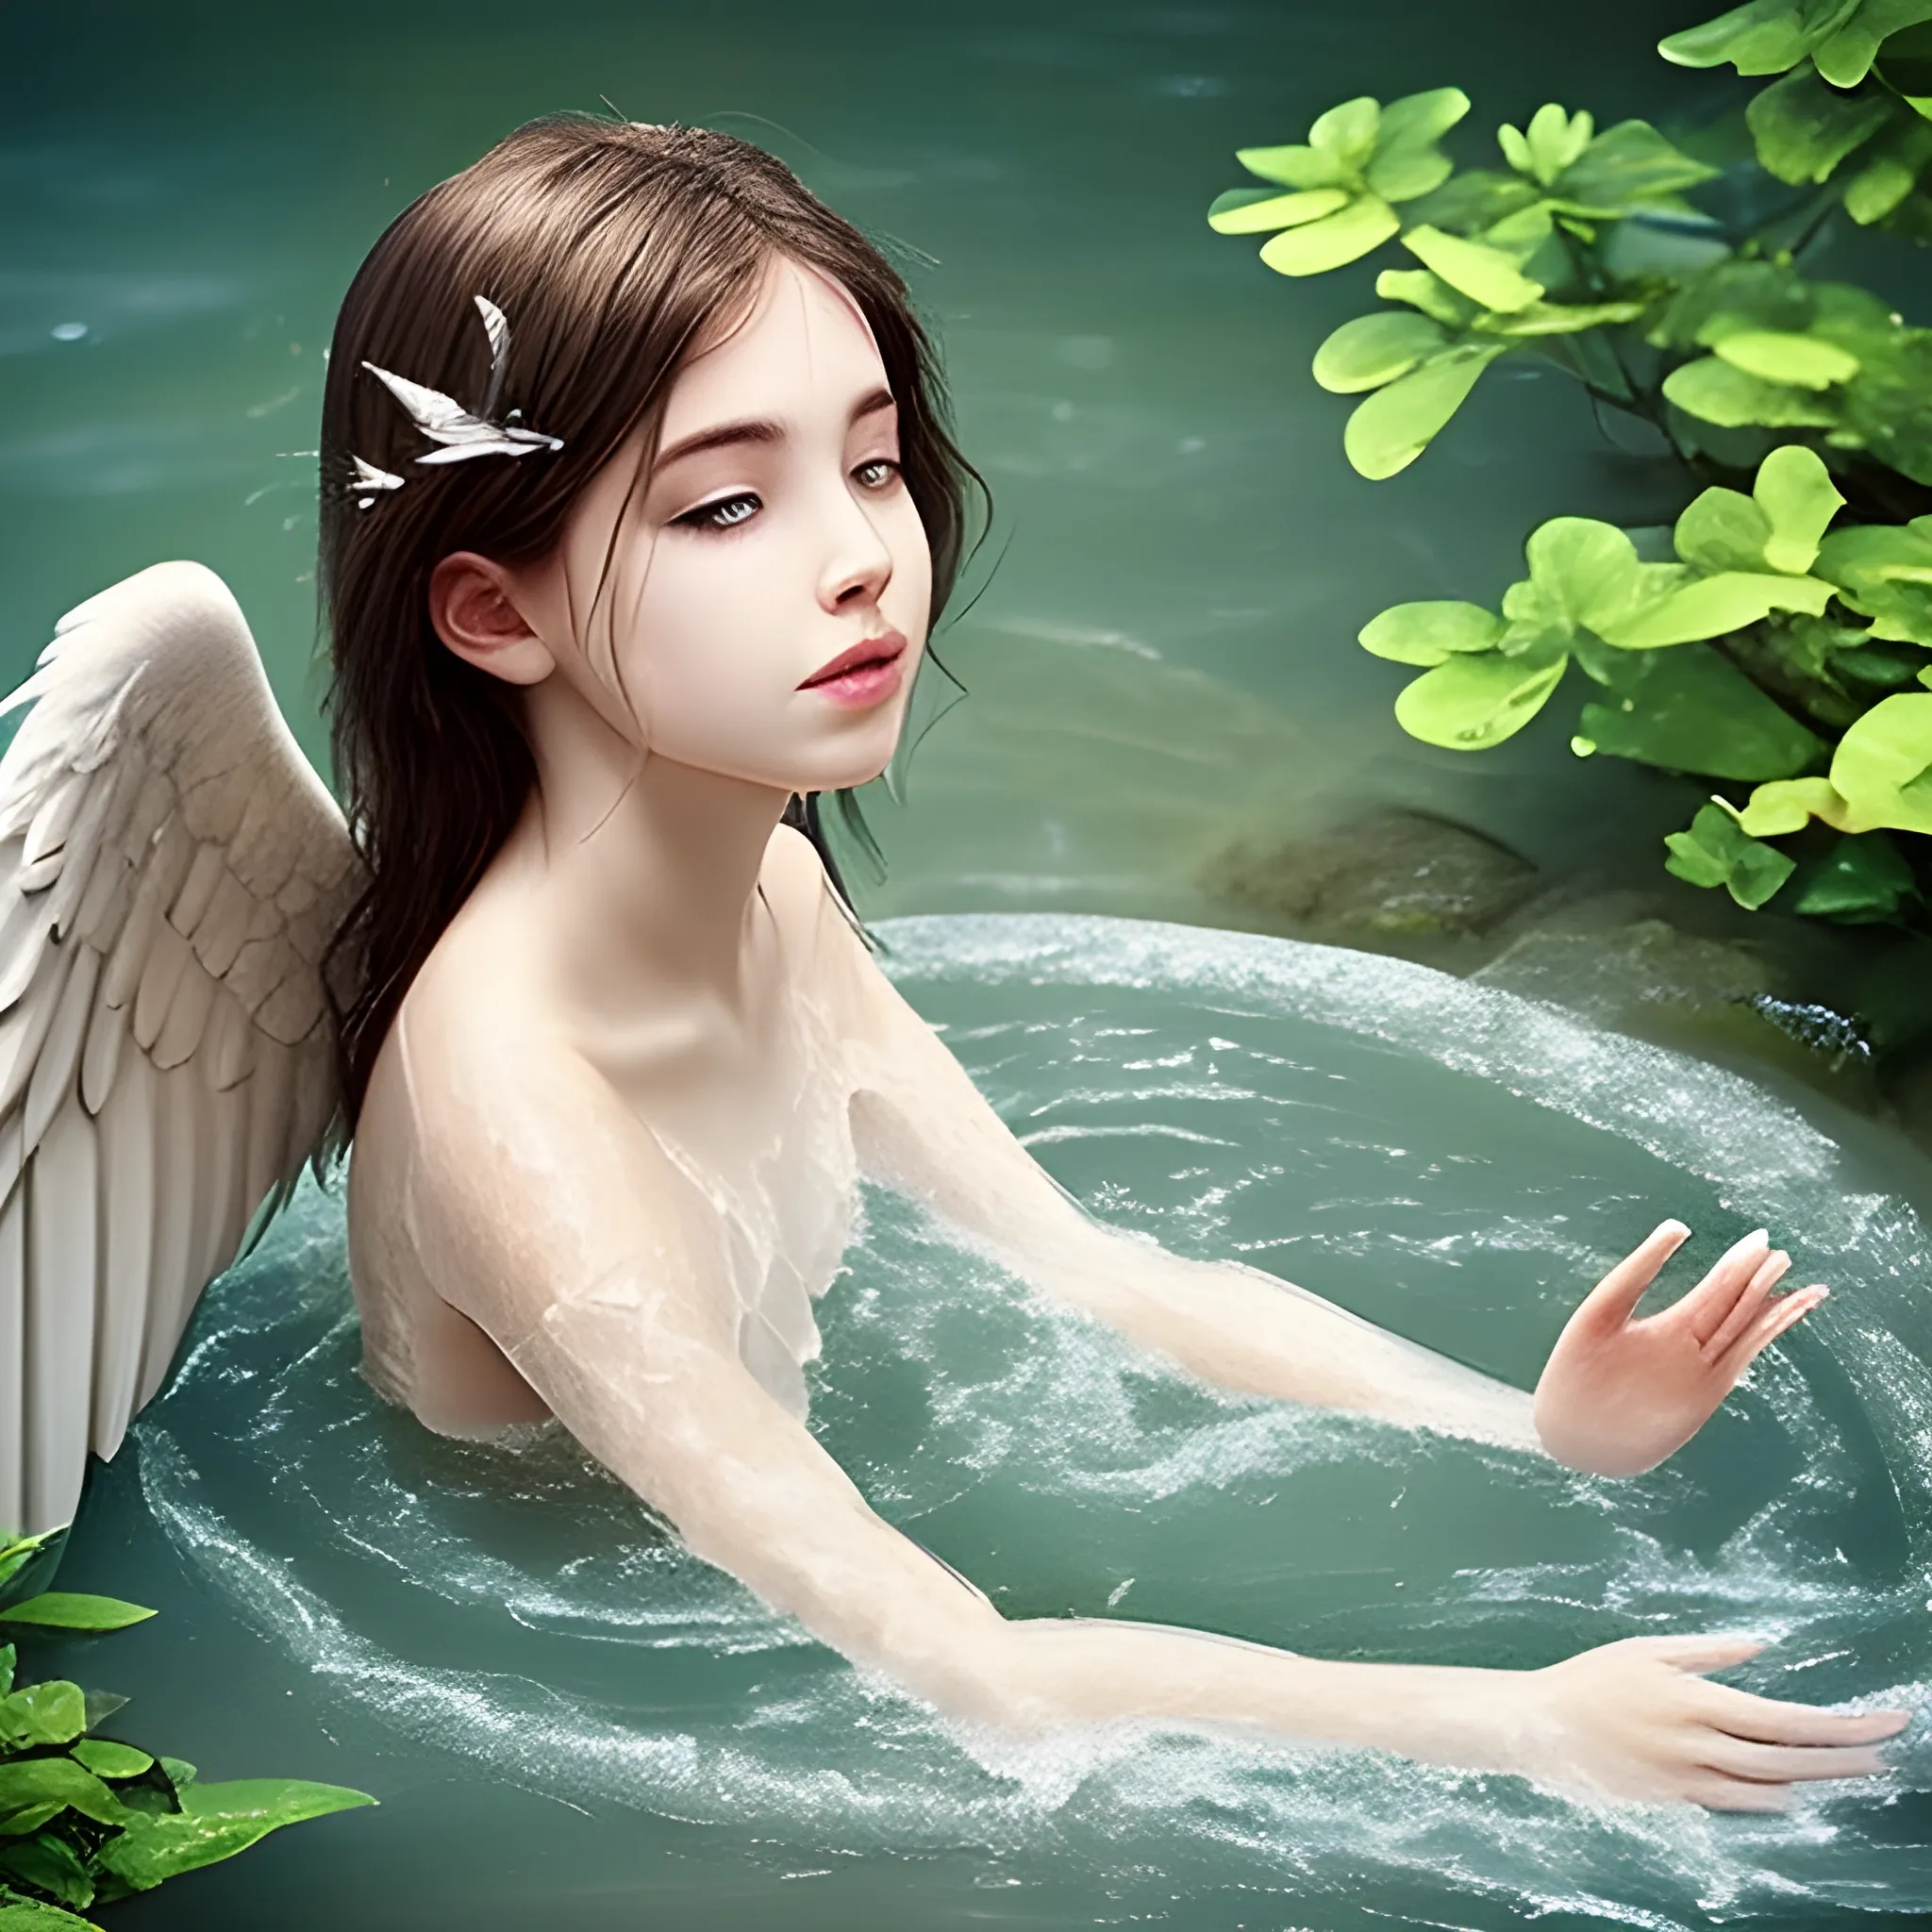 my dream looks distored but i can see a beautiful angel  bathing in the river
